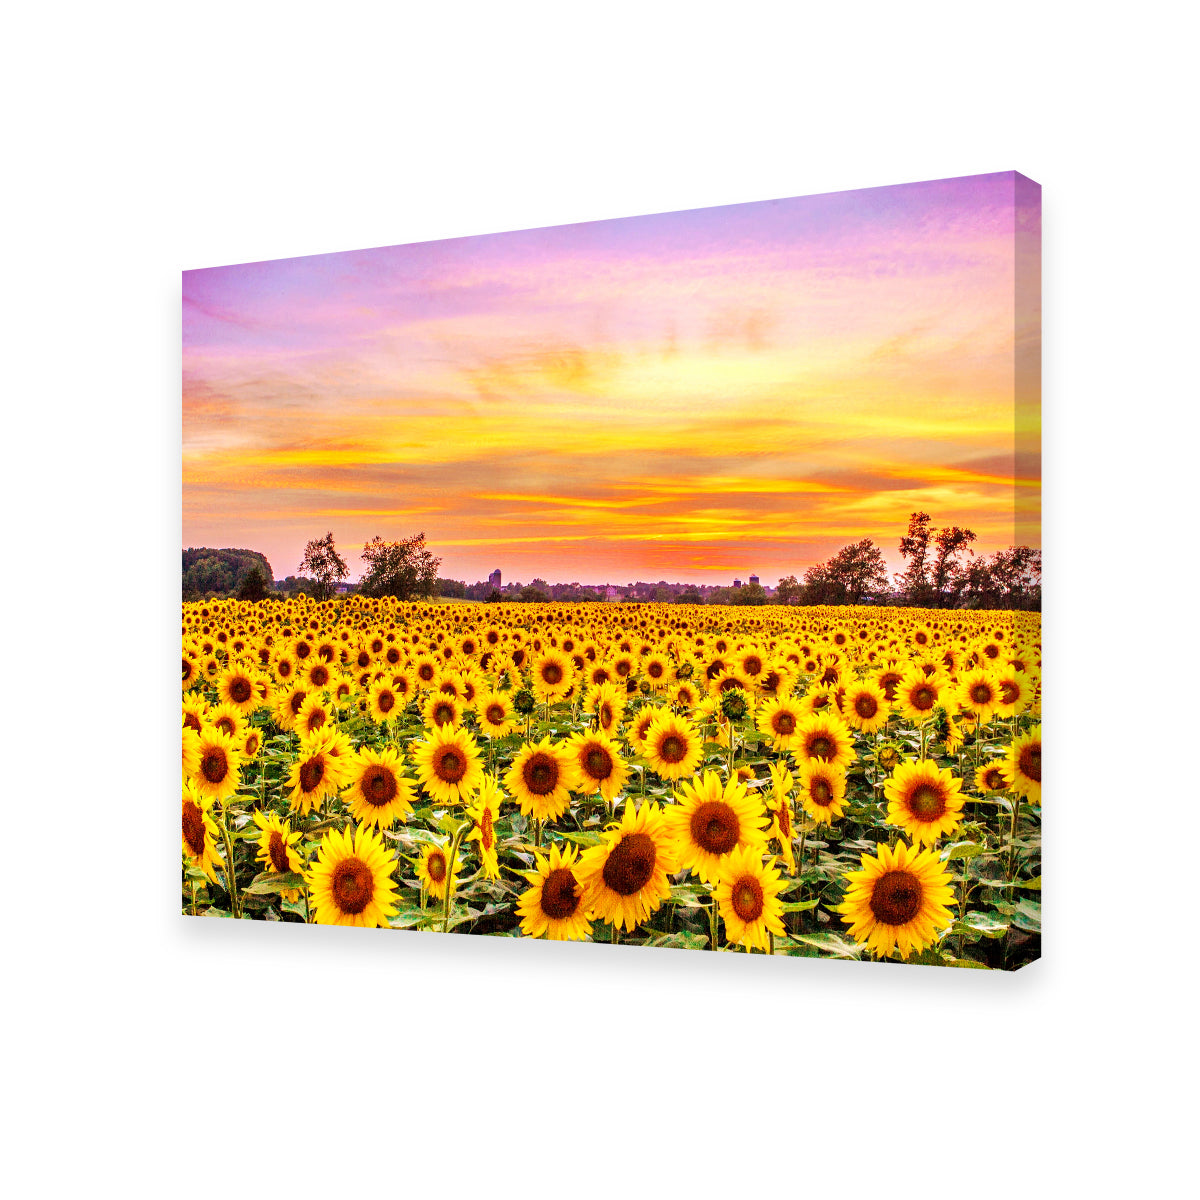 Bed of Sunflowers